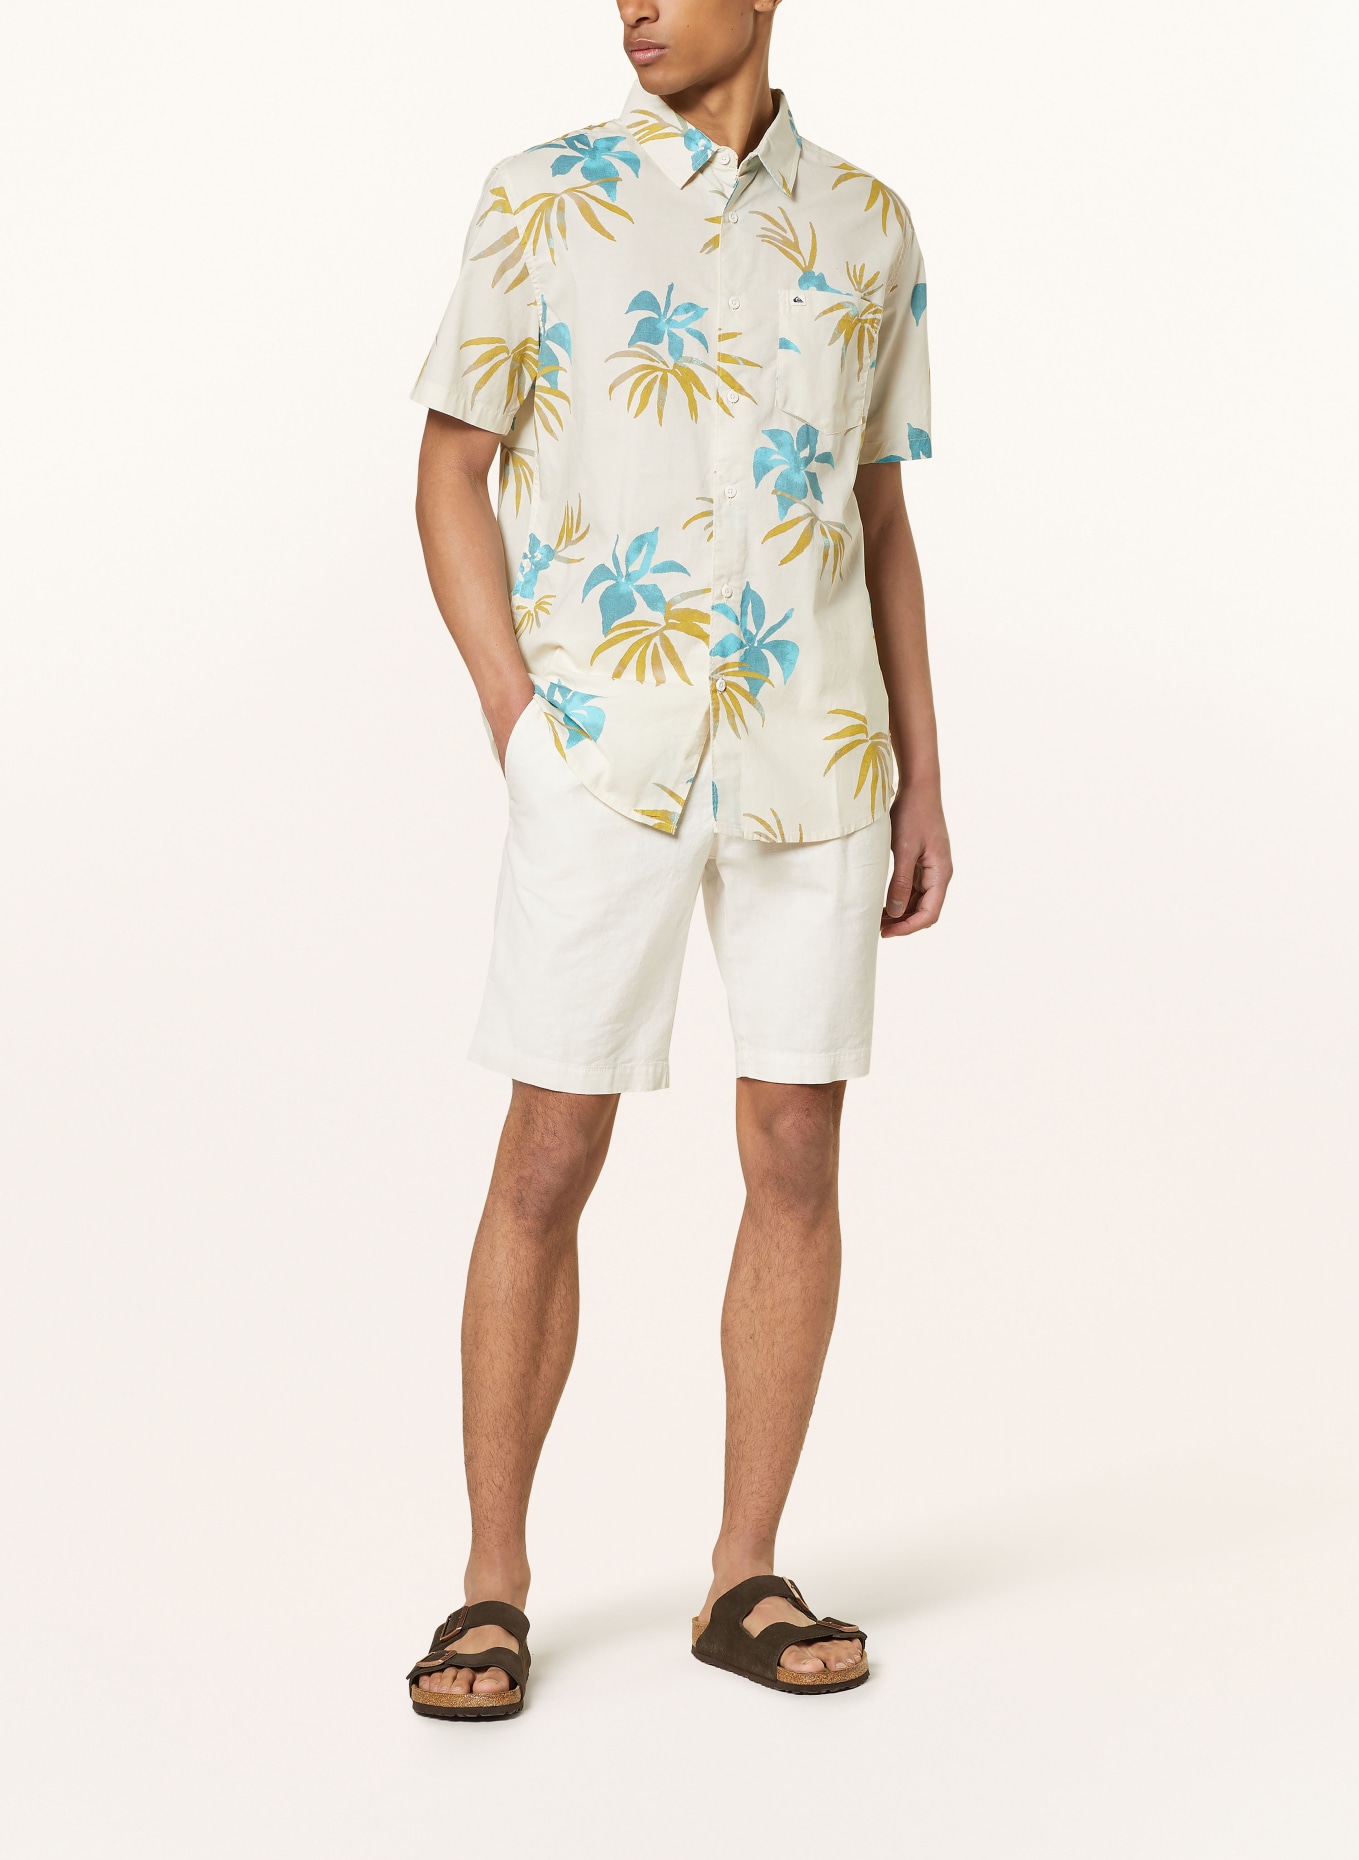 QUIKSILVER Short sleeve shirt APERO CLASSIC comfort fit, Color: LIGHT YELLOW/ TURQUOISE/ DARK YELLOW (Image 2)